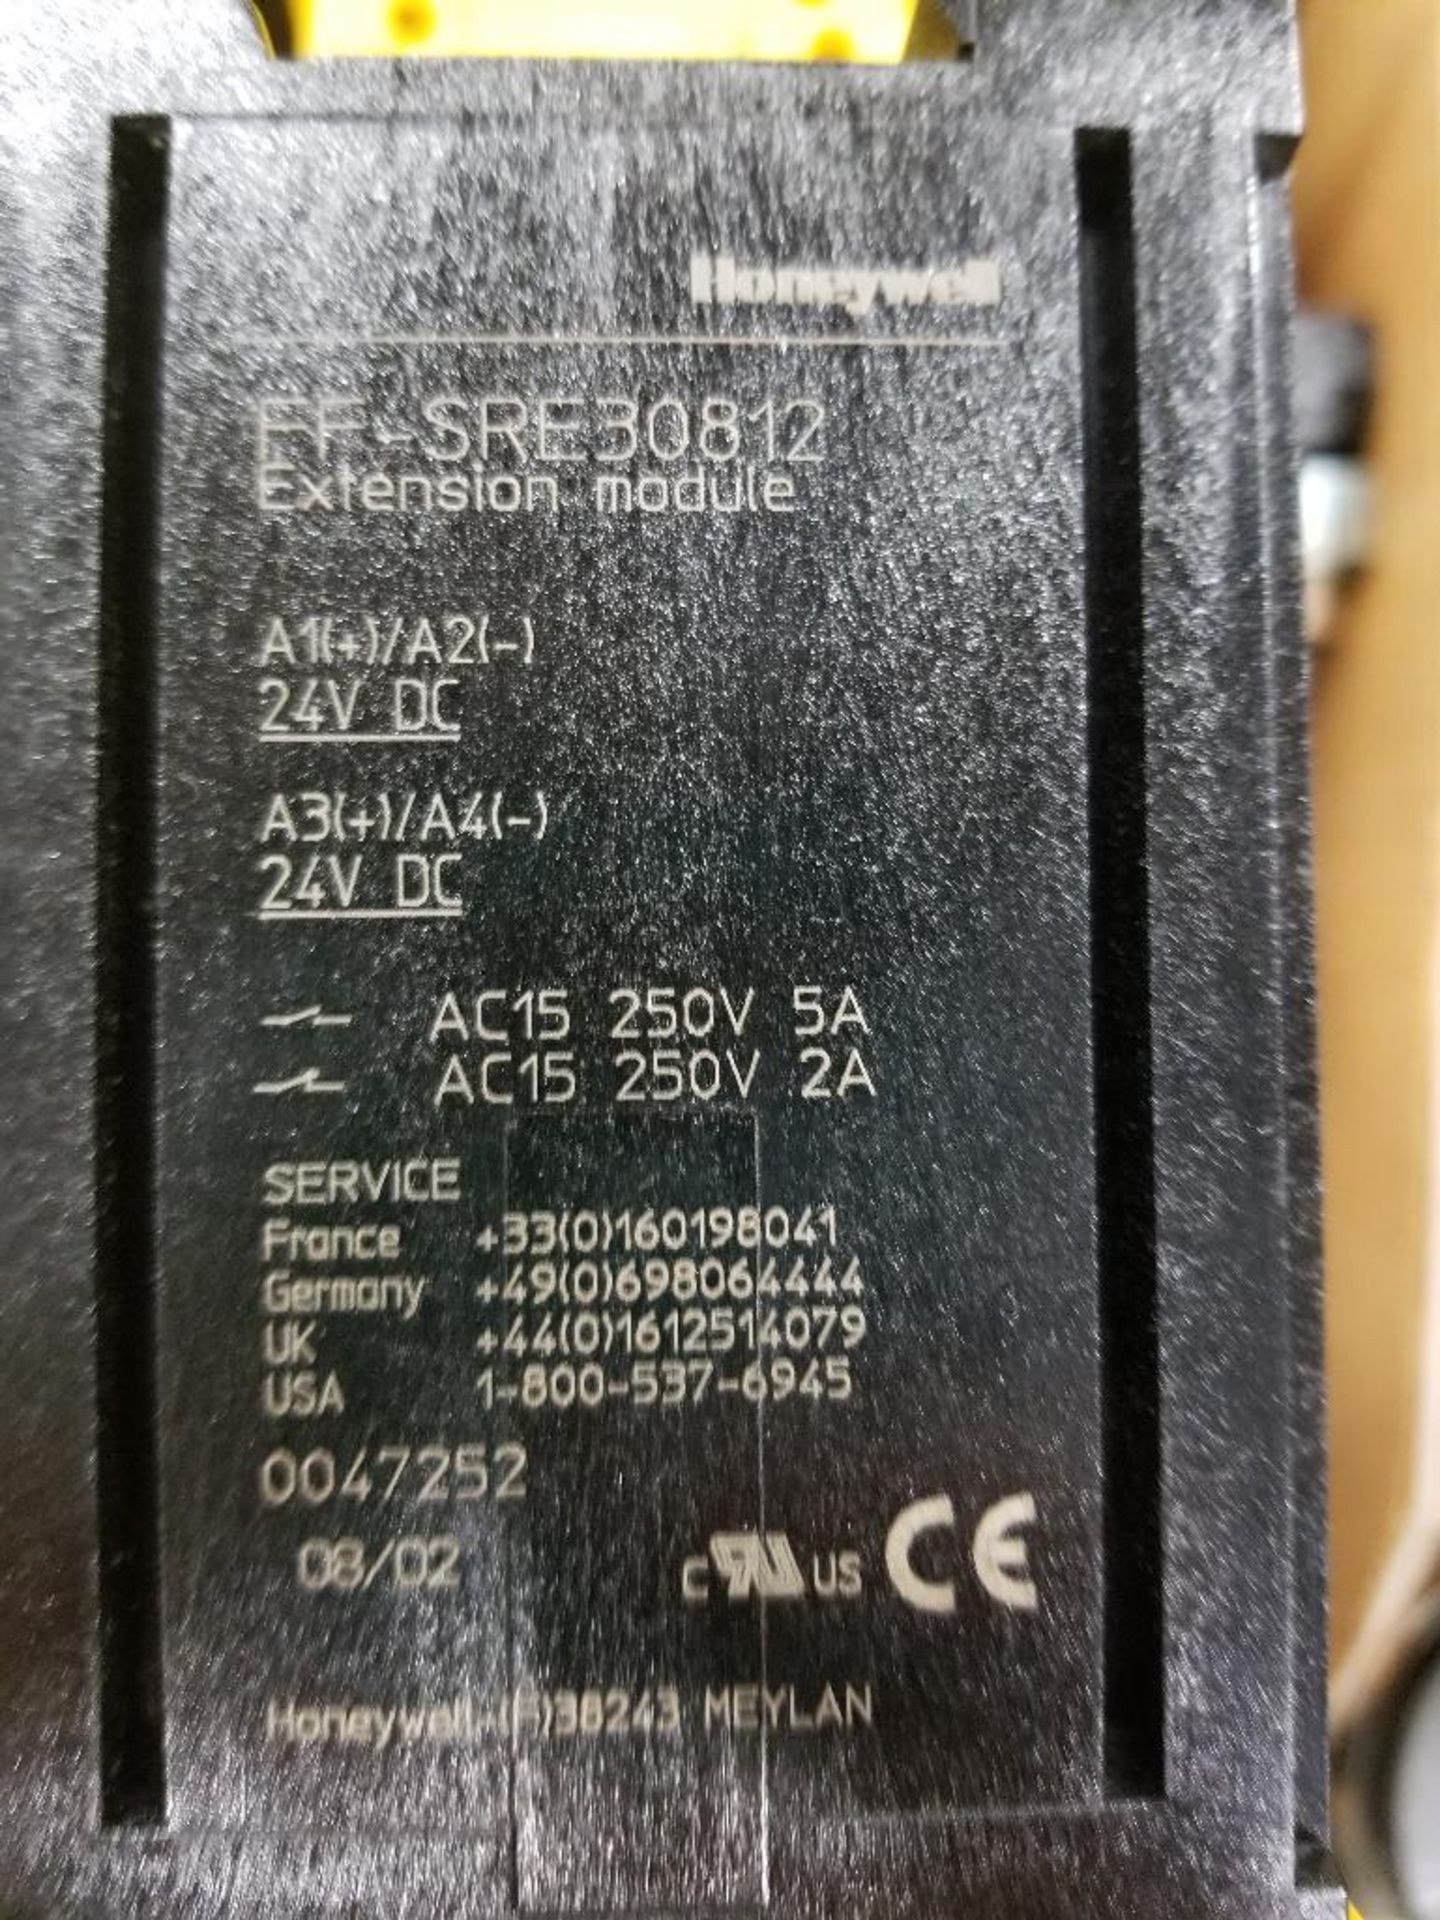 Qty 4 - Honeywell safety module. Part number FF-SRE30812. - Image 4 of 4